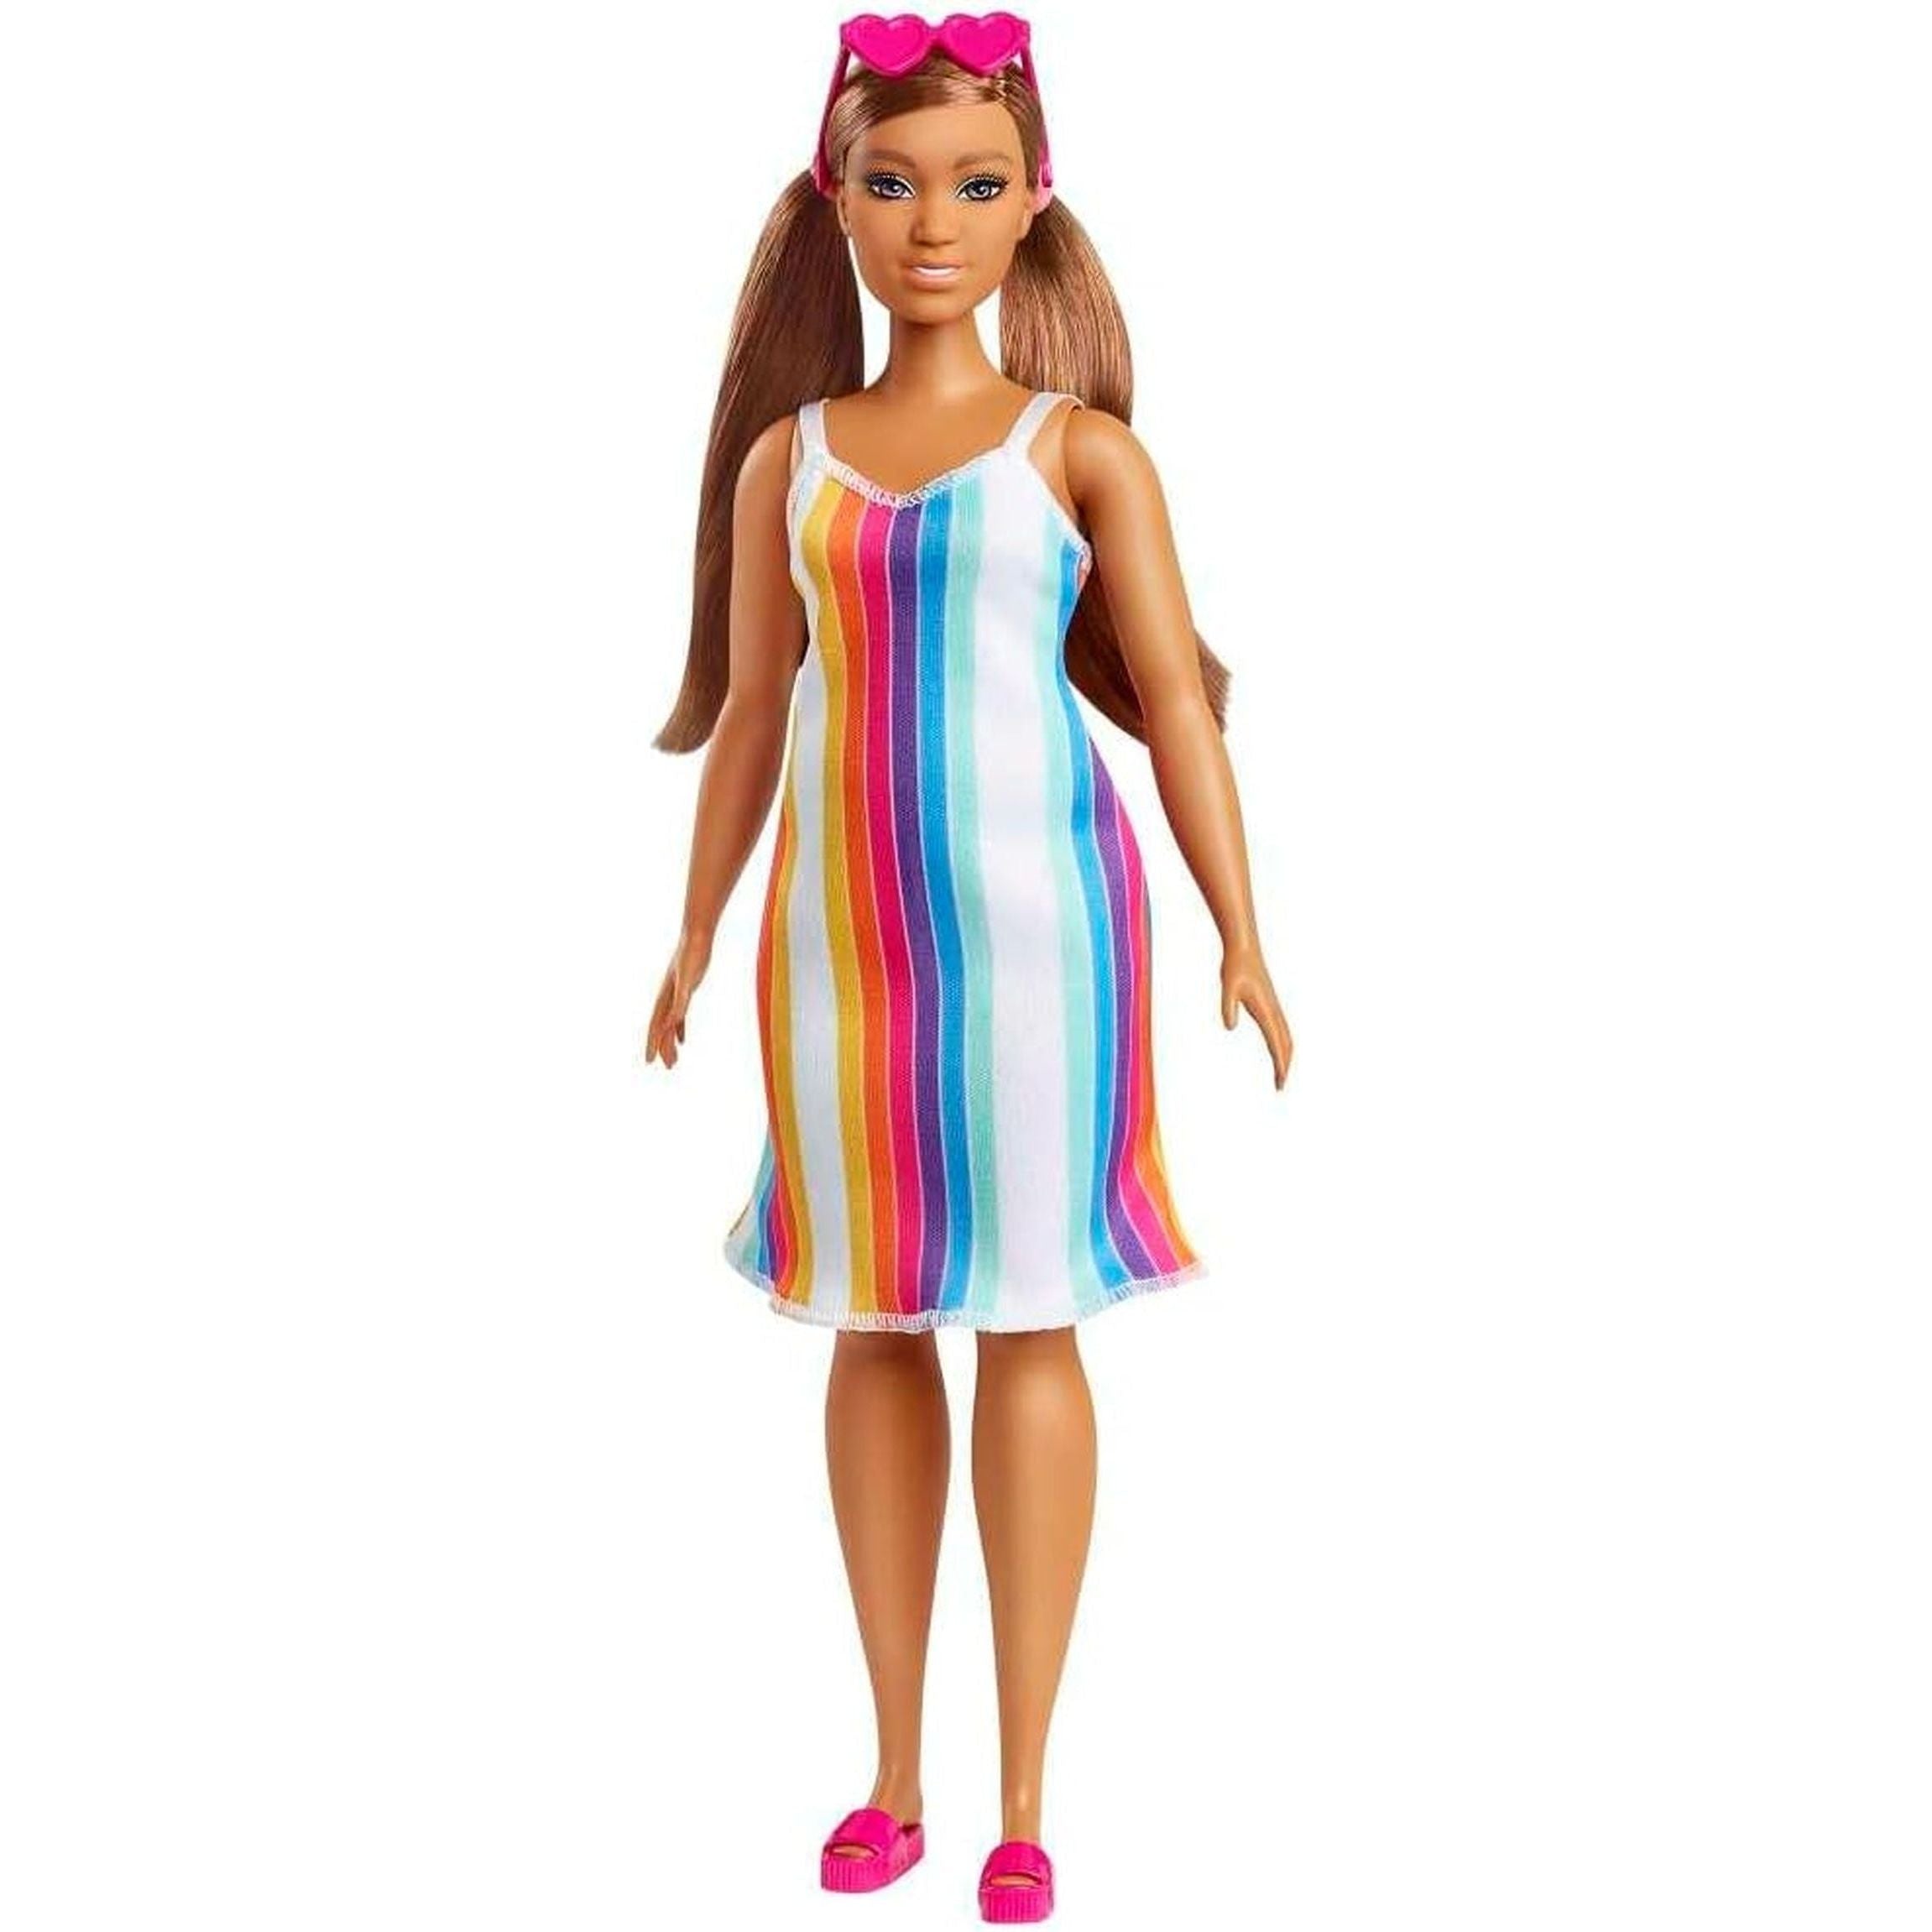 Loves the Ocean Doll with Brown Hair, Colorful Dress & Accessories, Doll & Clothes Made from Recycled Plastics